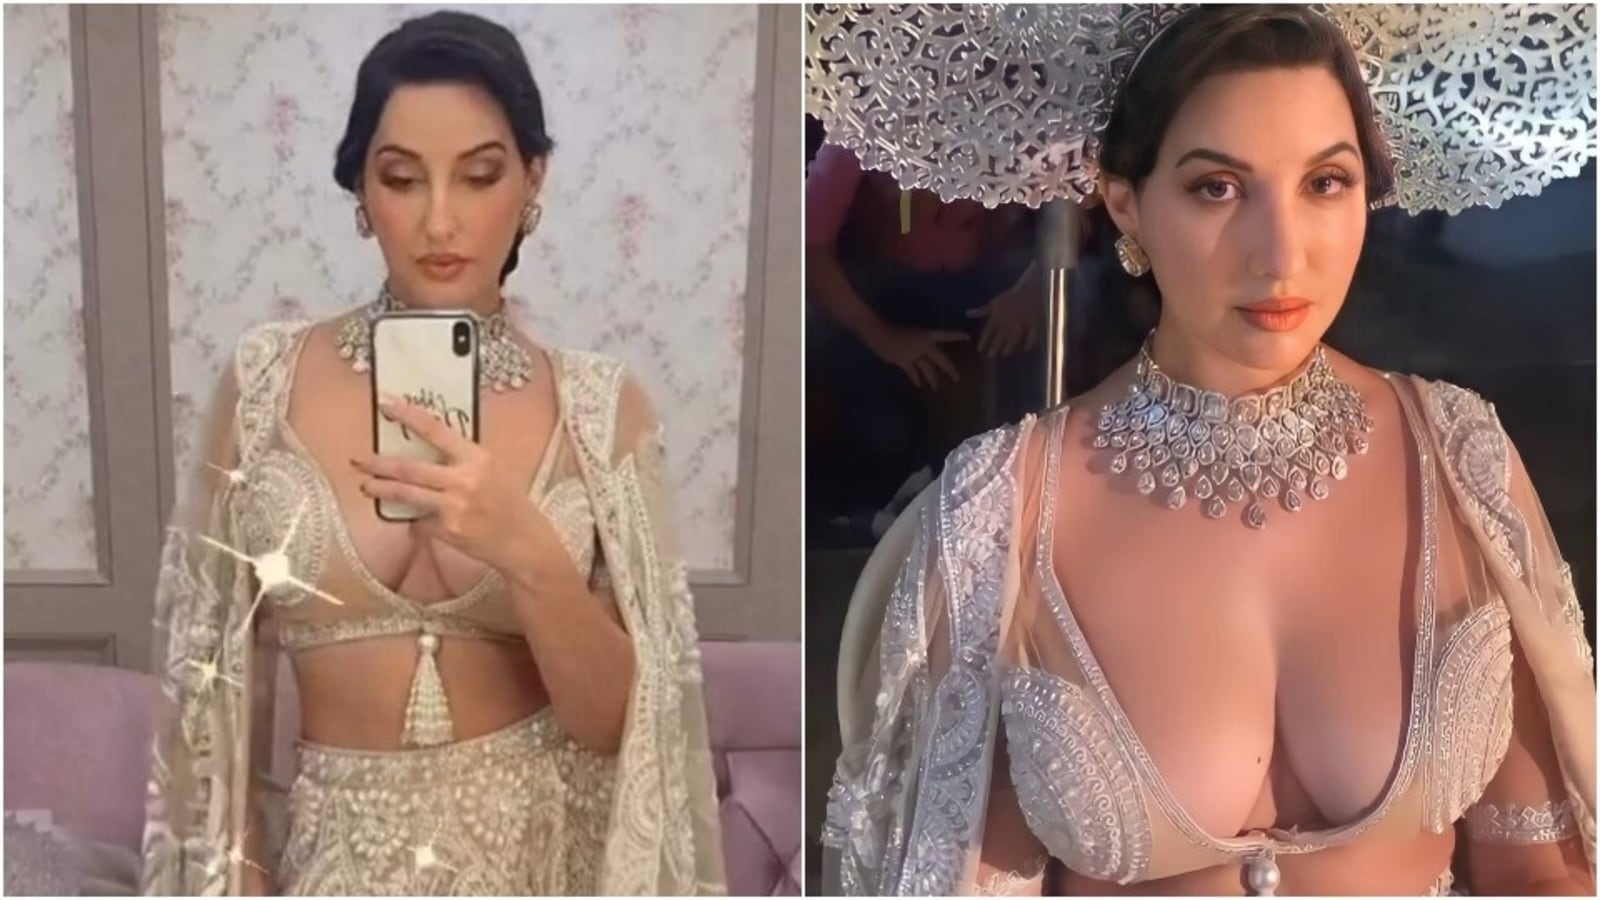 Nora Fatehi Nudes - Nora Fatehi is nothing less than royalty in bralette and thigh-slit  lehenga, all pics and videos | Fashion Trends - Hindustan Times